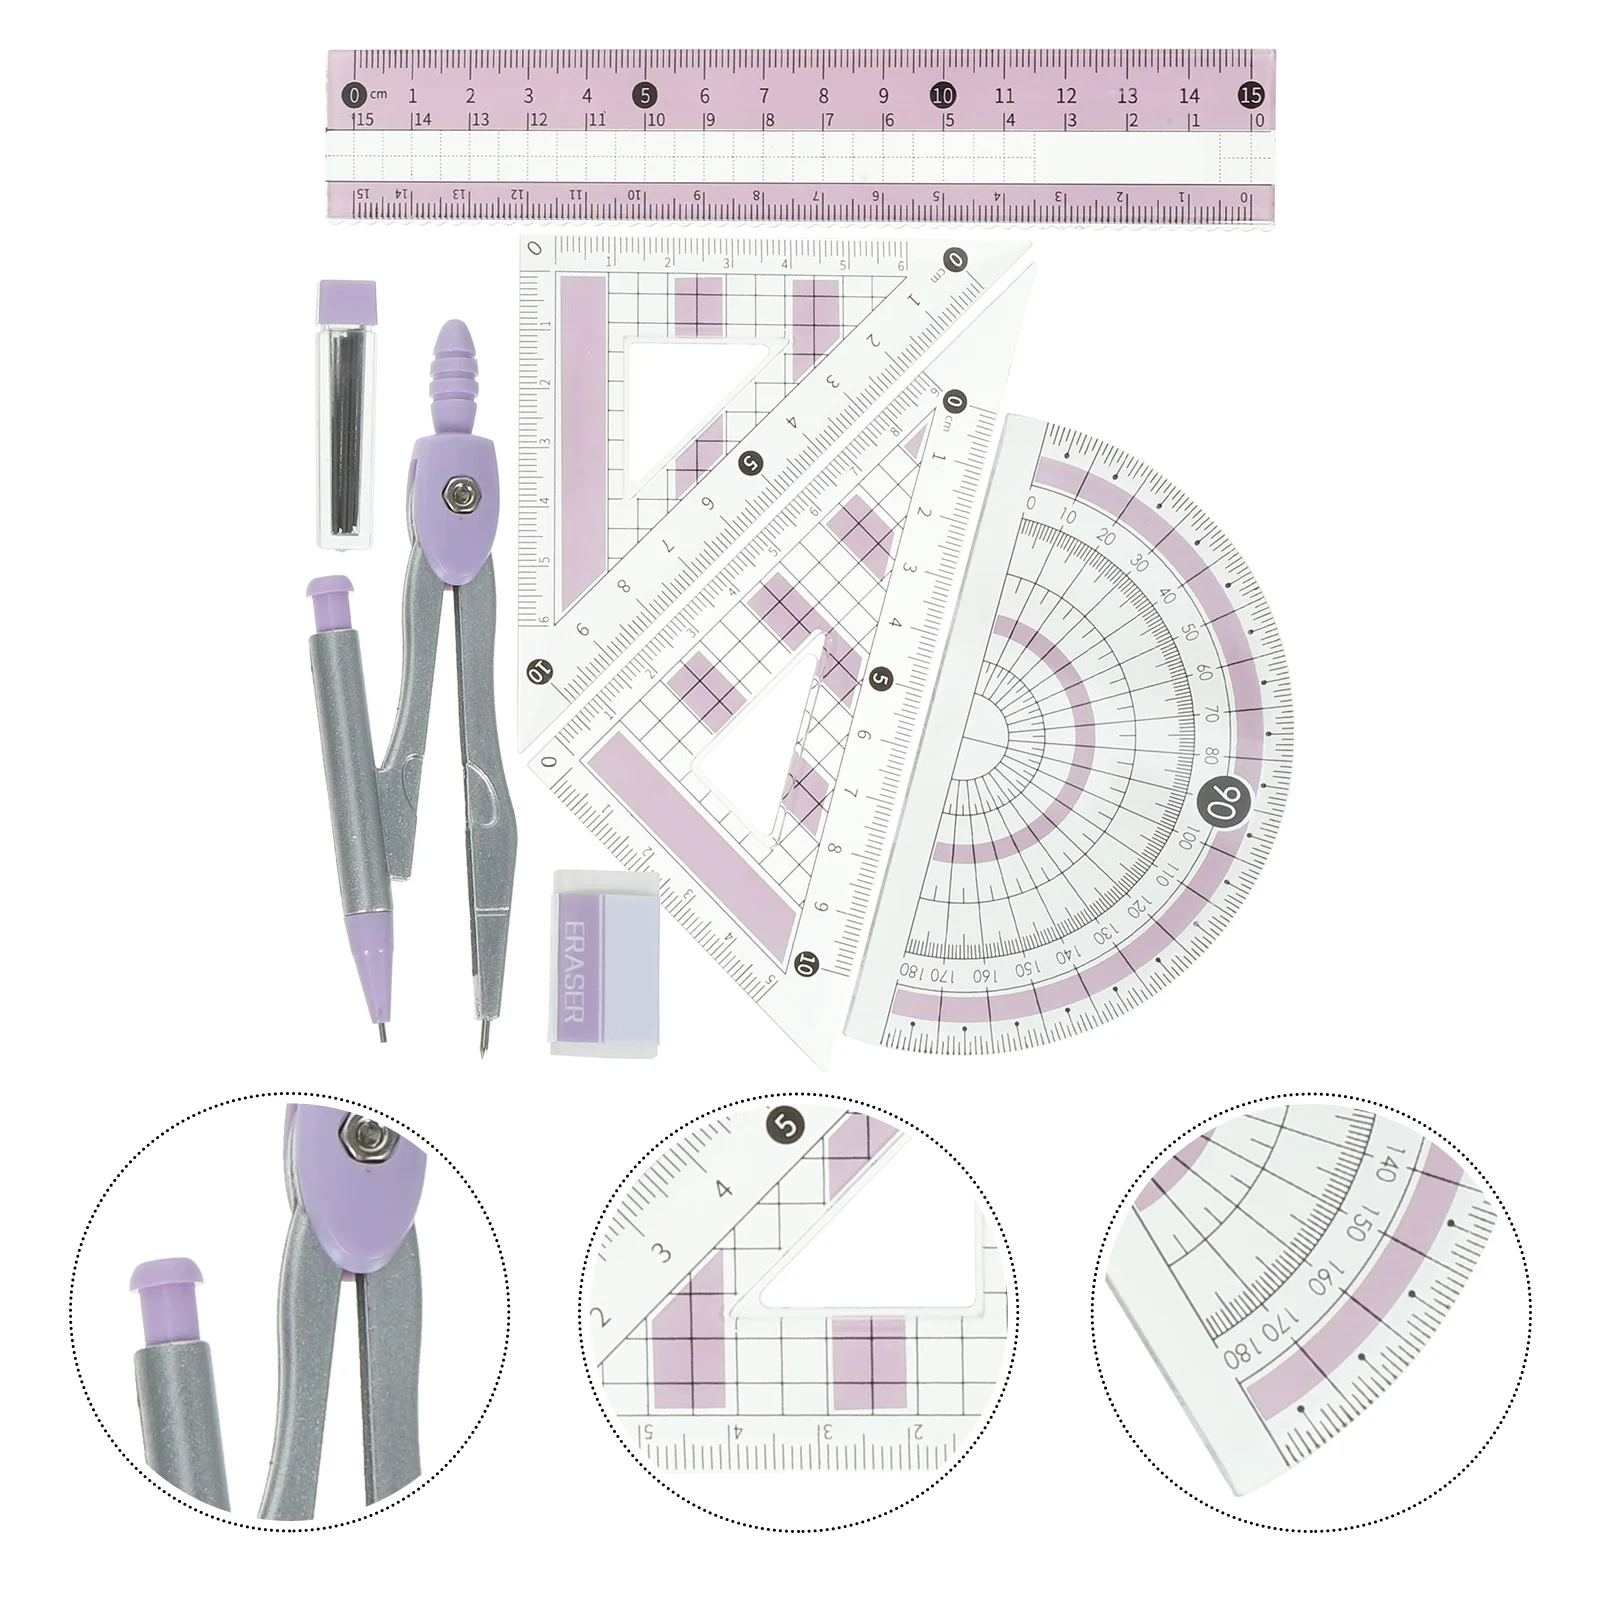 Ruler Set Schoolsupplies Office Drawing Compass Chaiers Accessories Plastic Protractor for Geometry and ruler set compass and protractor measurement tool professional geometry drawing accessories pencil student stationery